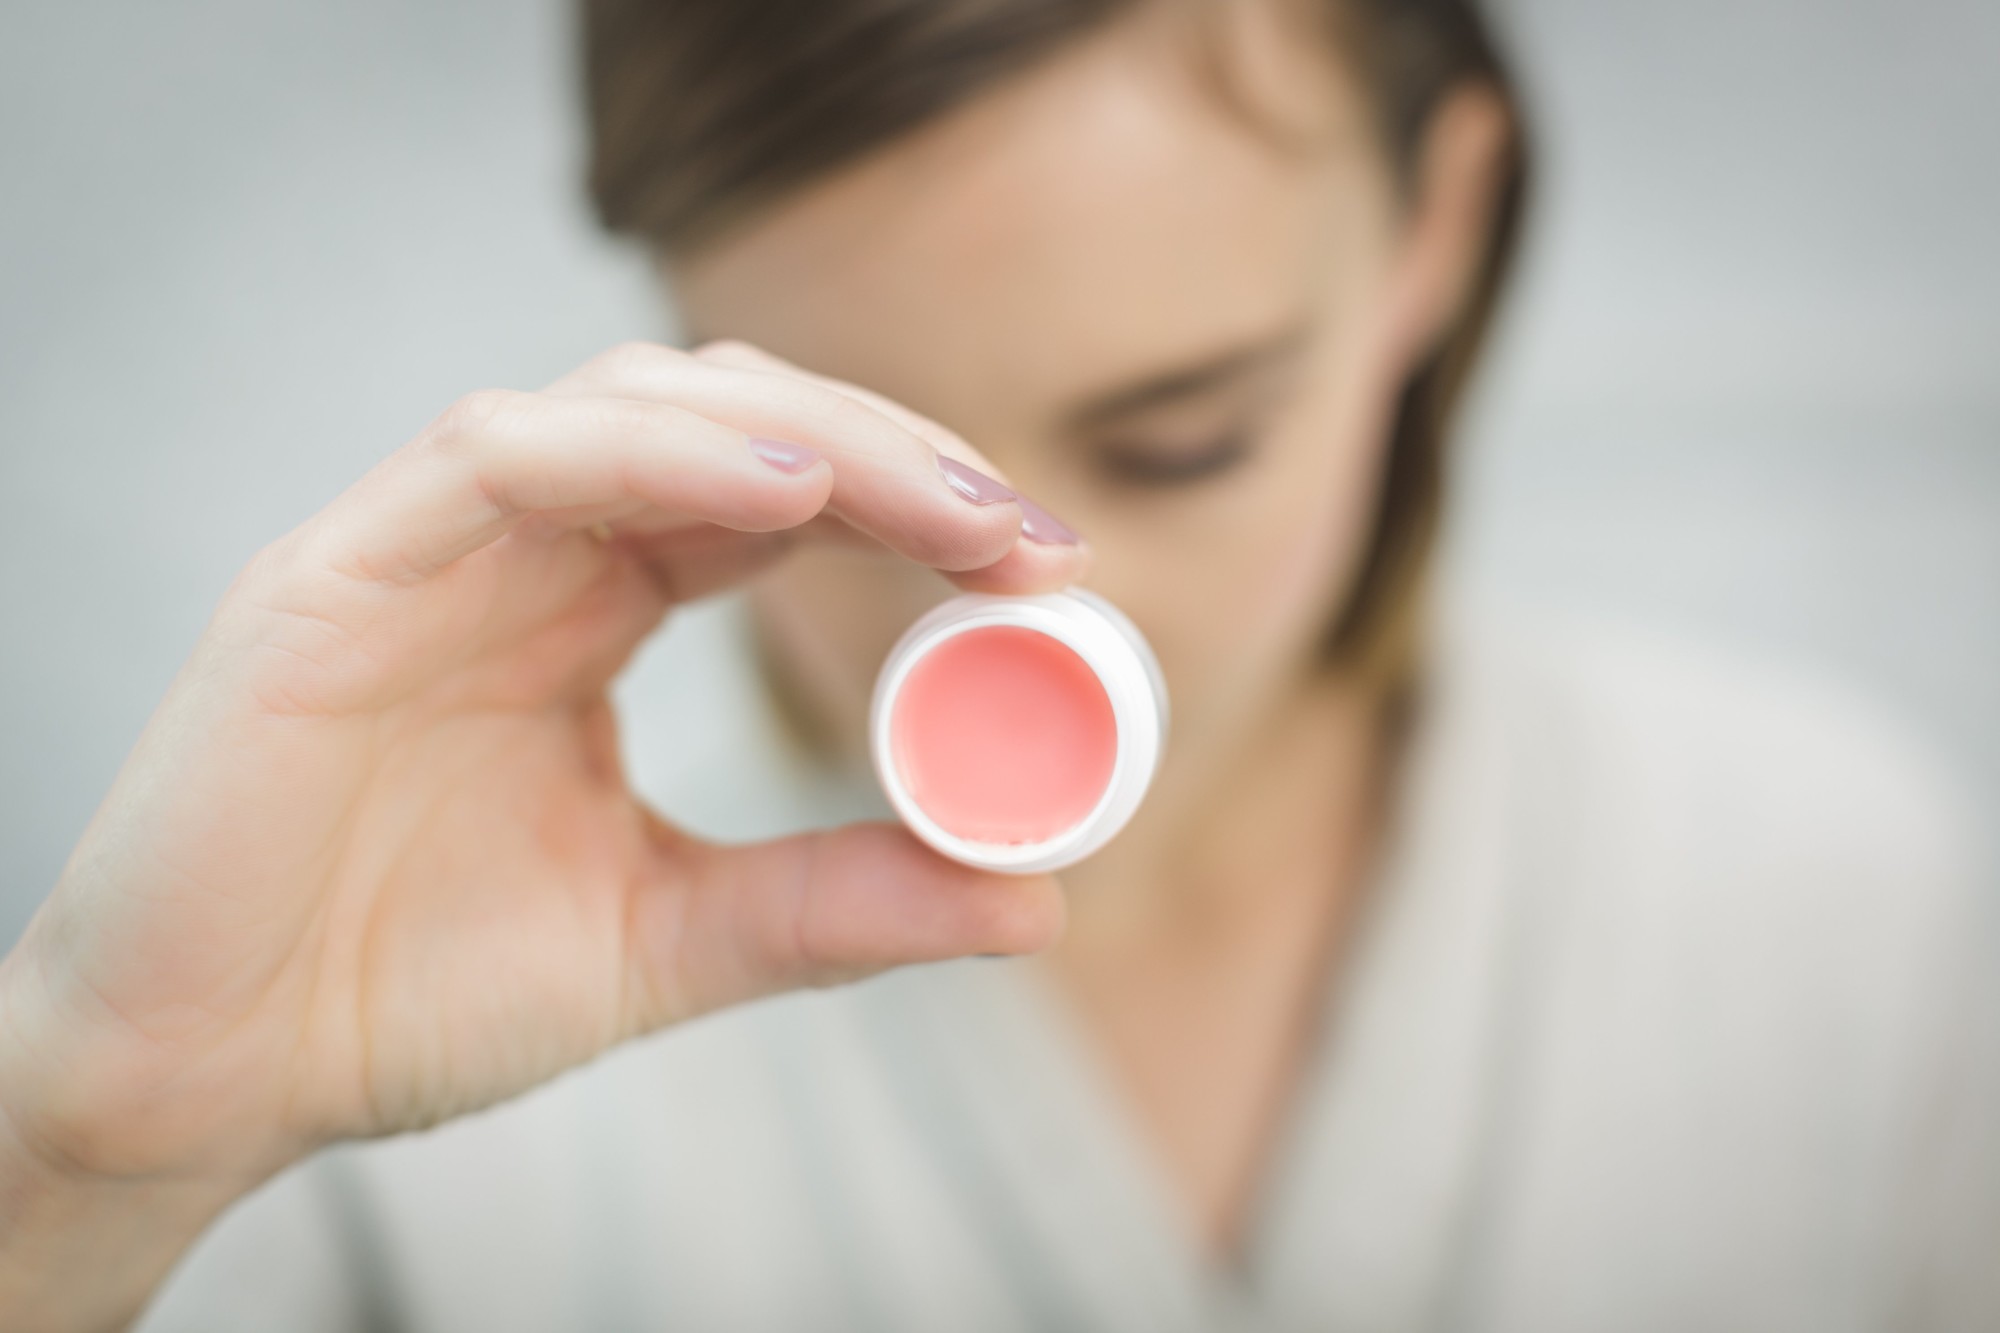 These days, there are a lot of skincare treatment options out there. Learn the differences between a balm vs. salve here.